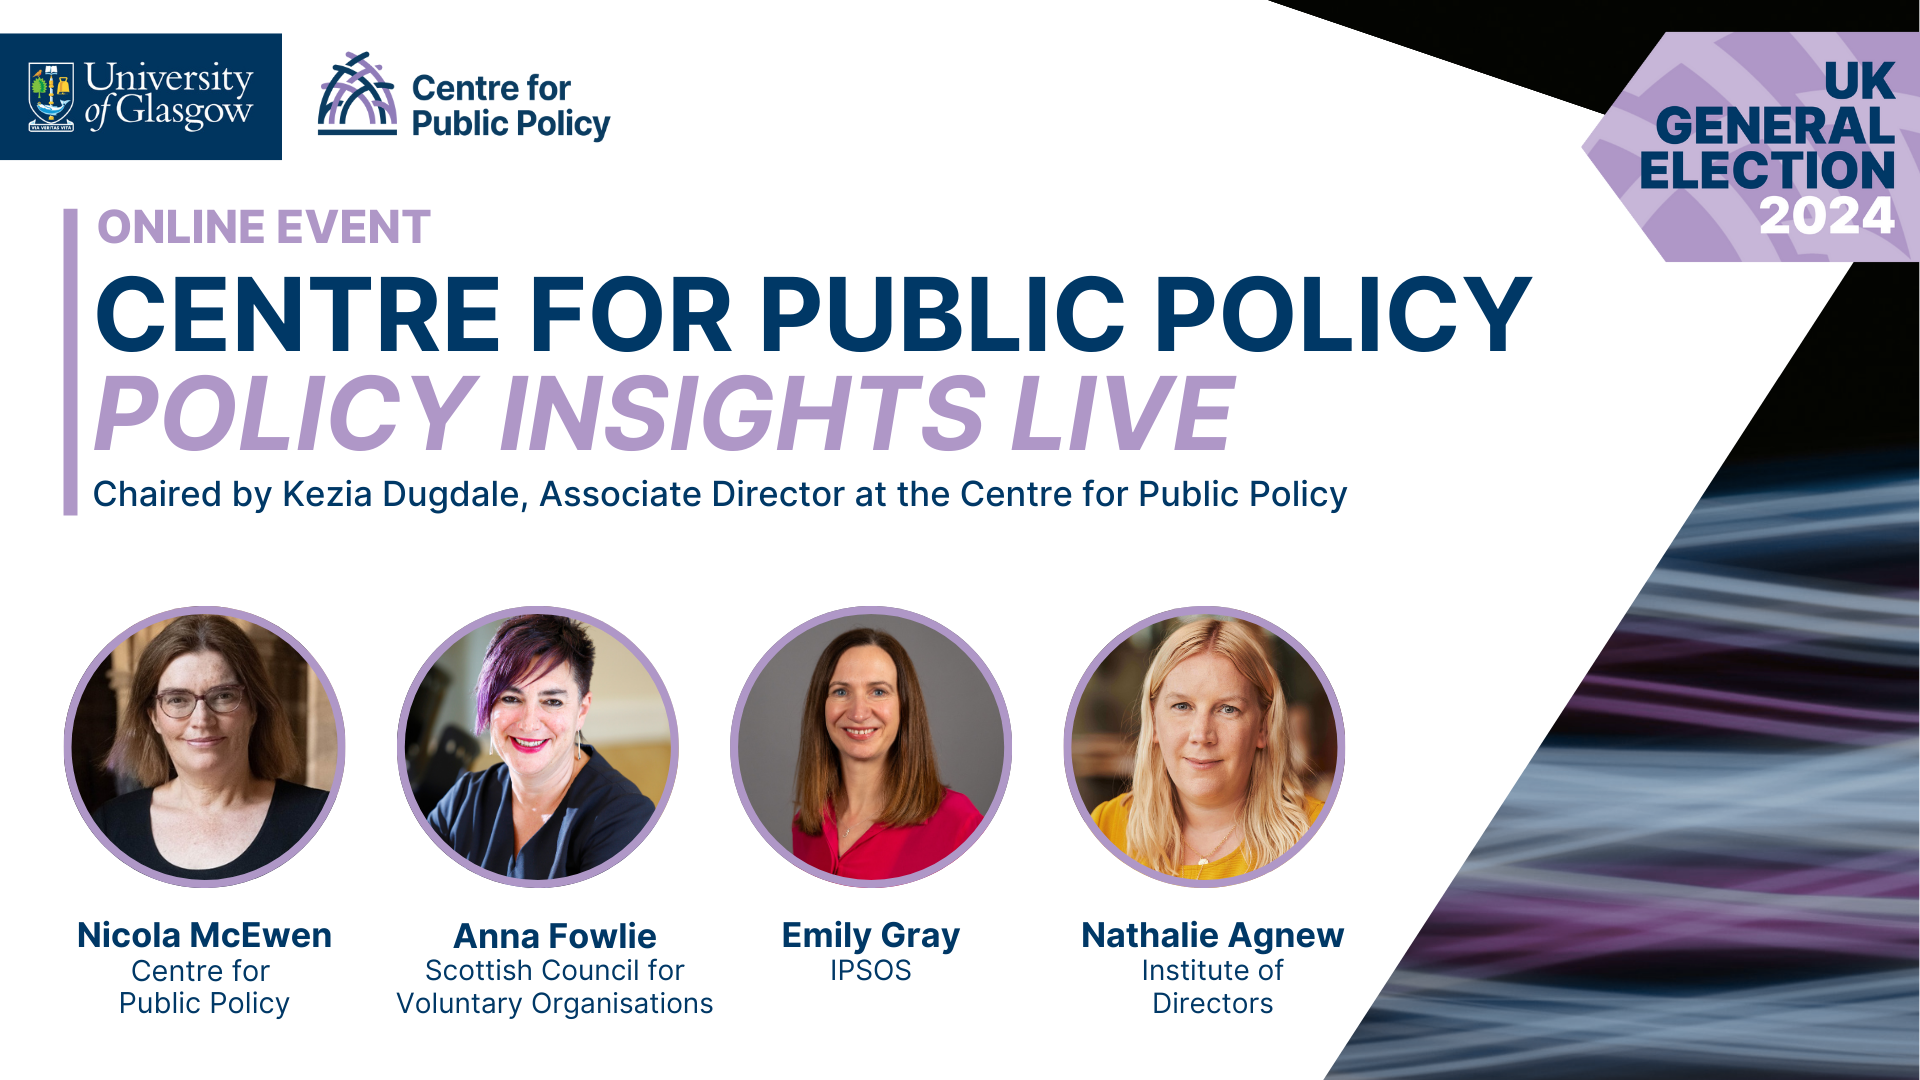 Promotional graphic for Policy Insights Live featuring photos of the four speakers